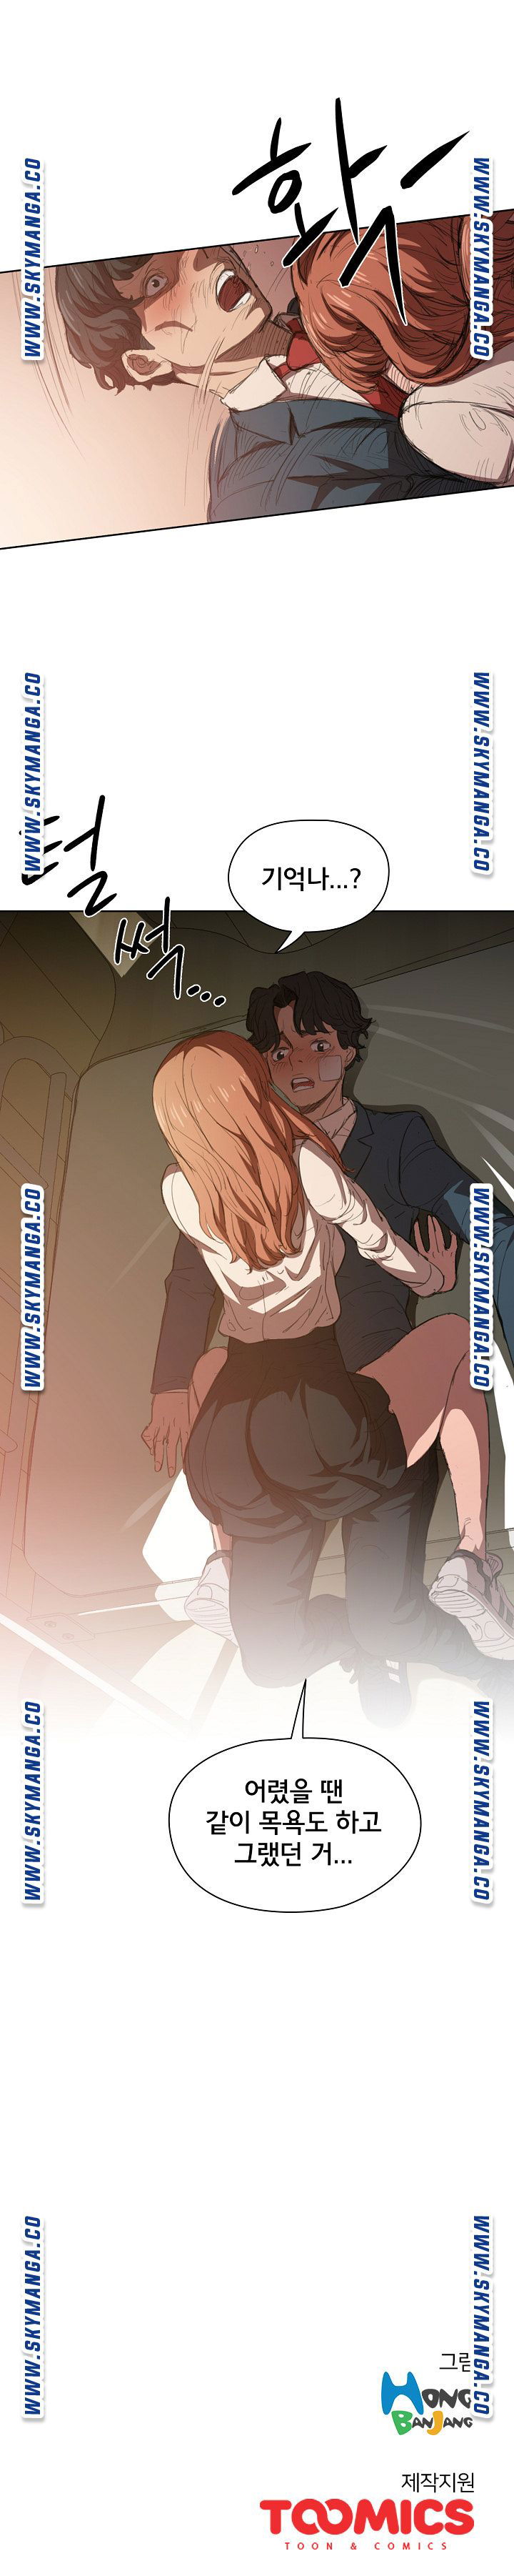 how-about-getting-lost-raw-chap-2-17